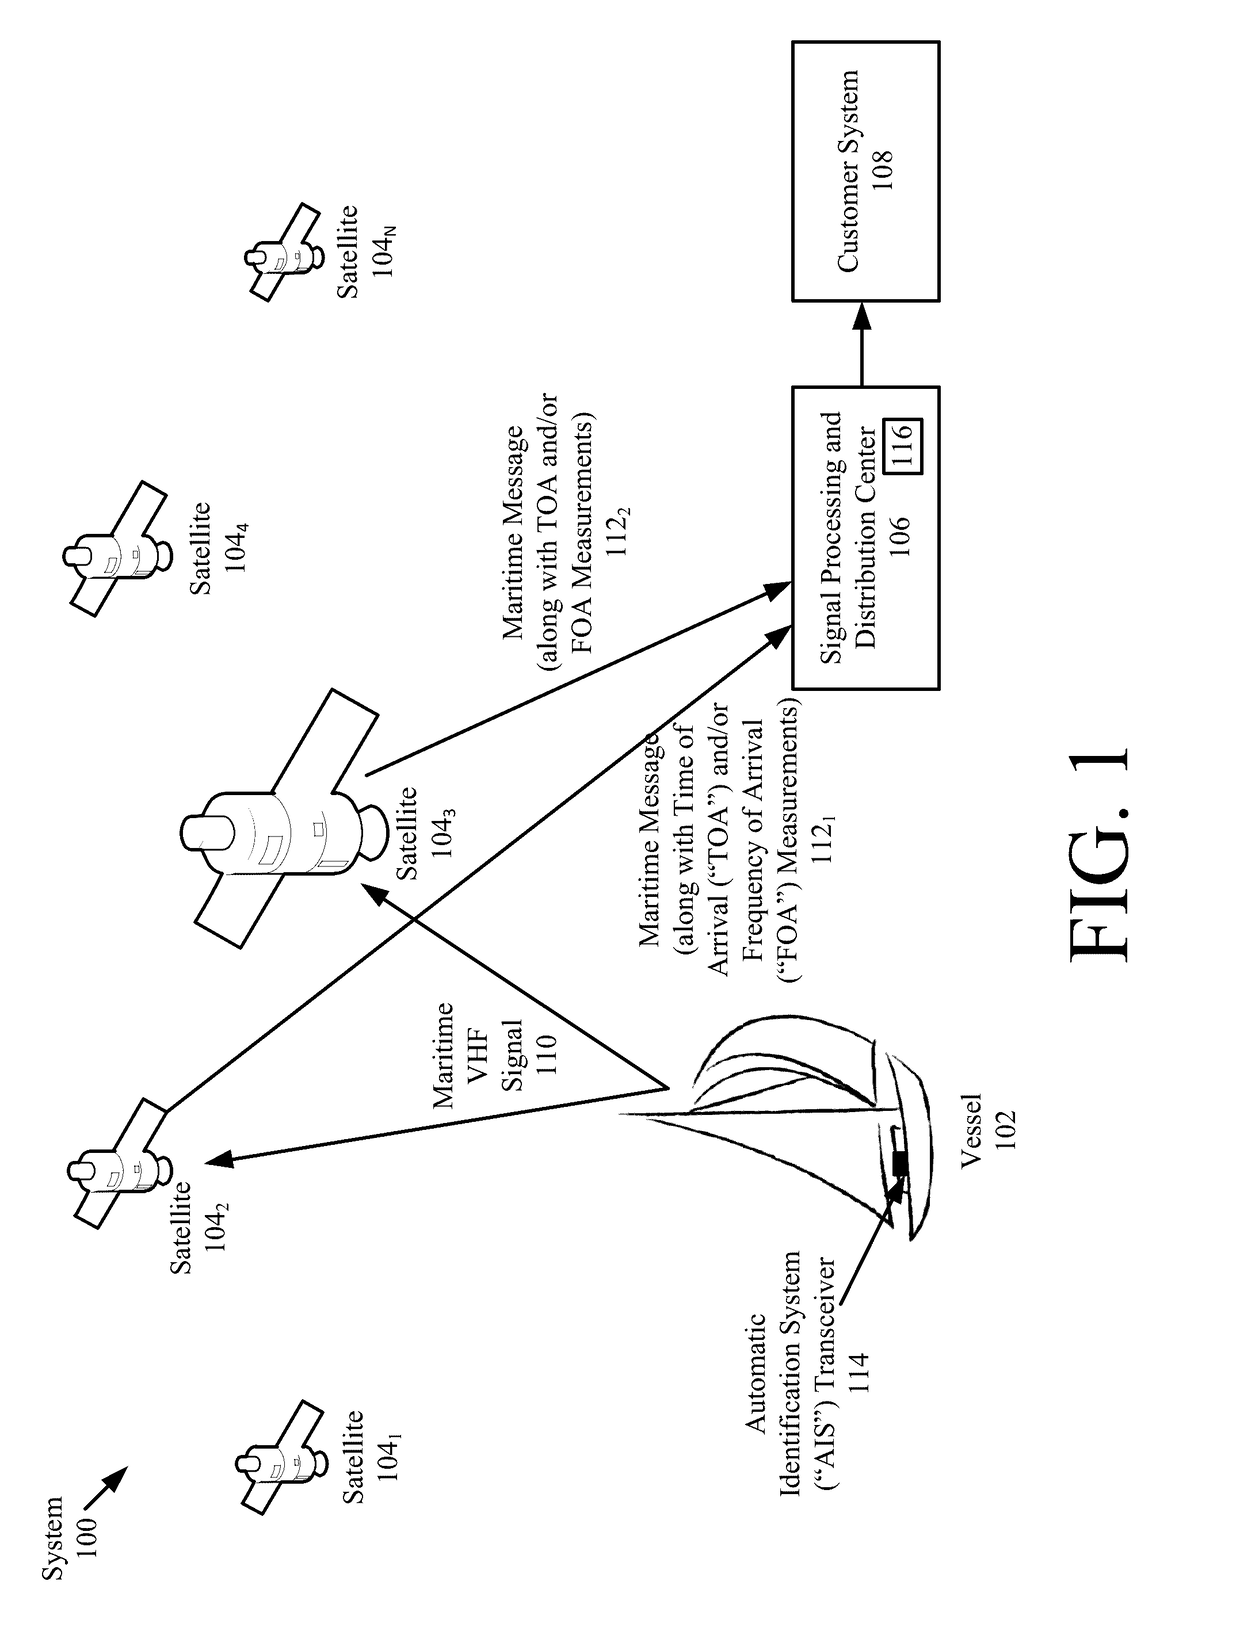 Systems and methods for space-based geolocation of vessels using maritime signals transmitted therefrom